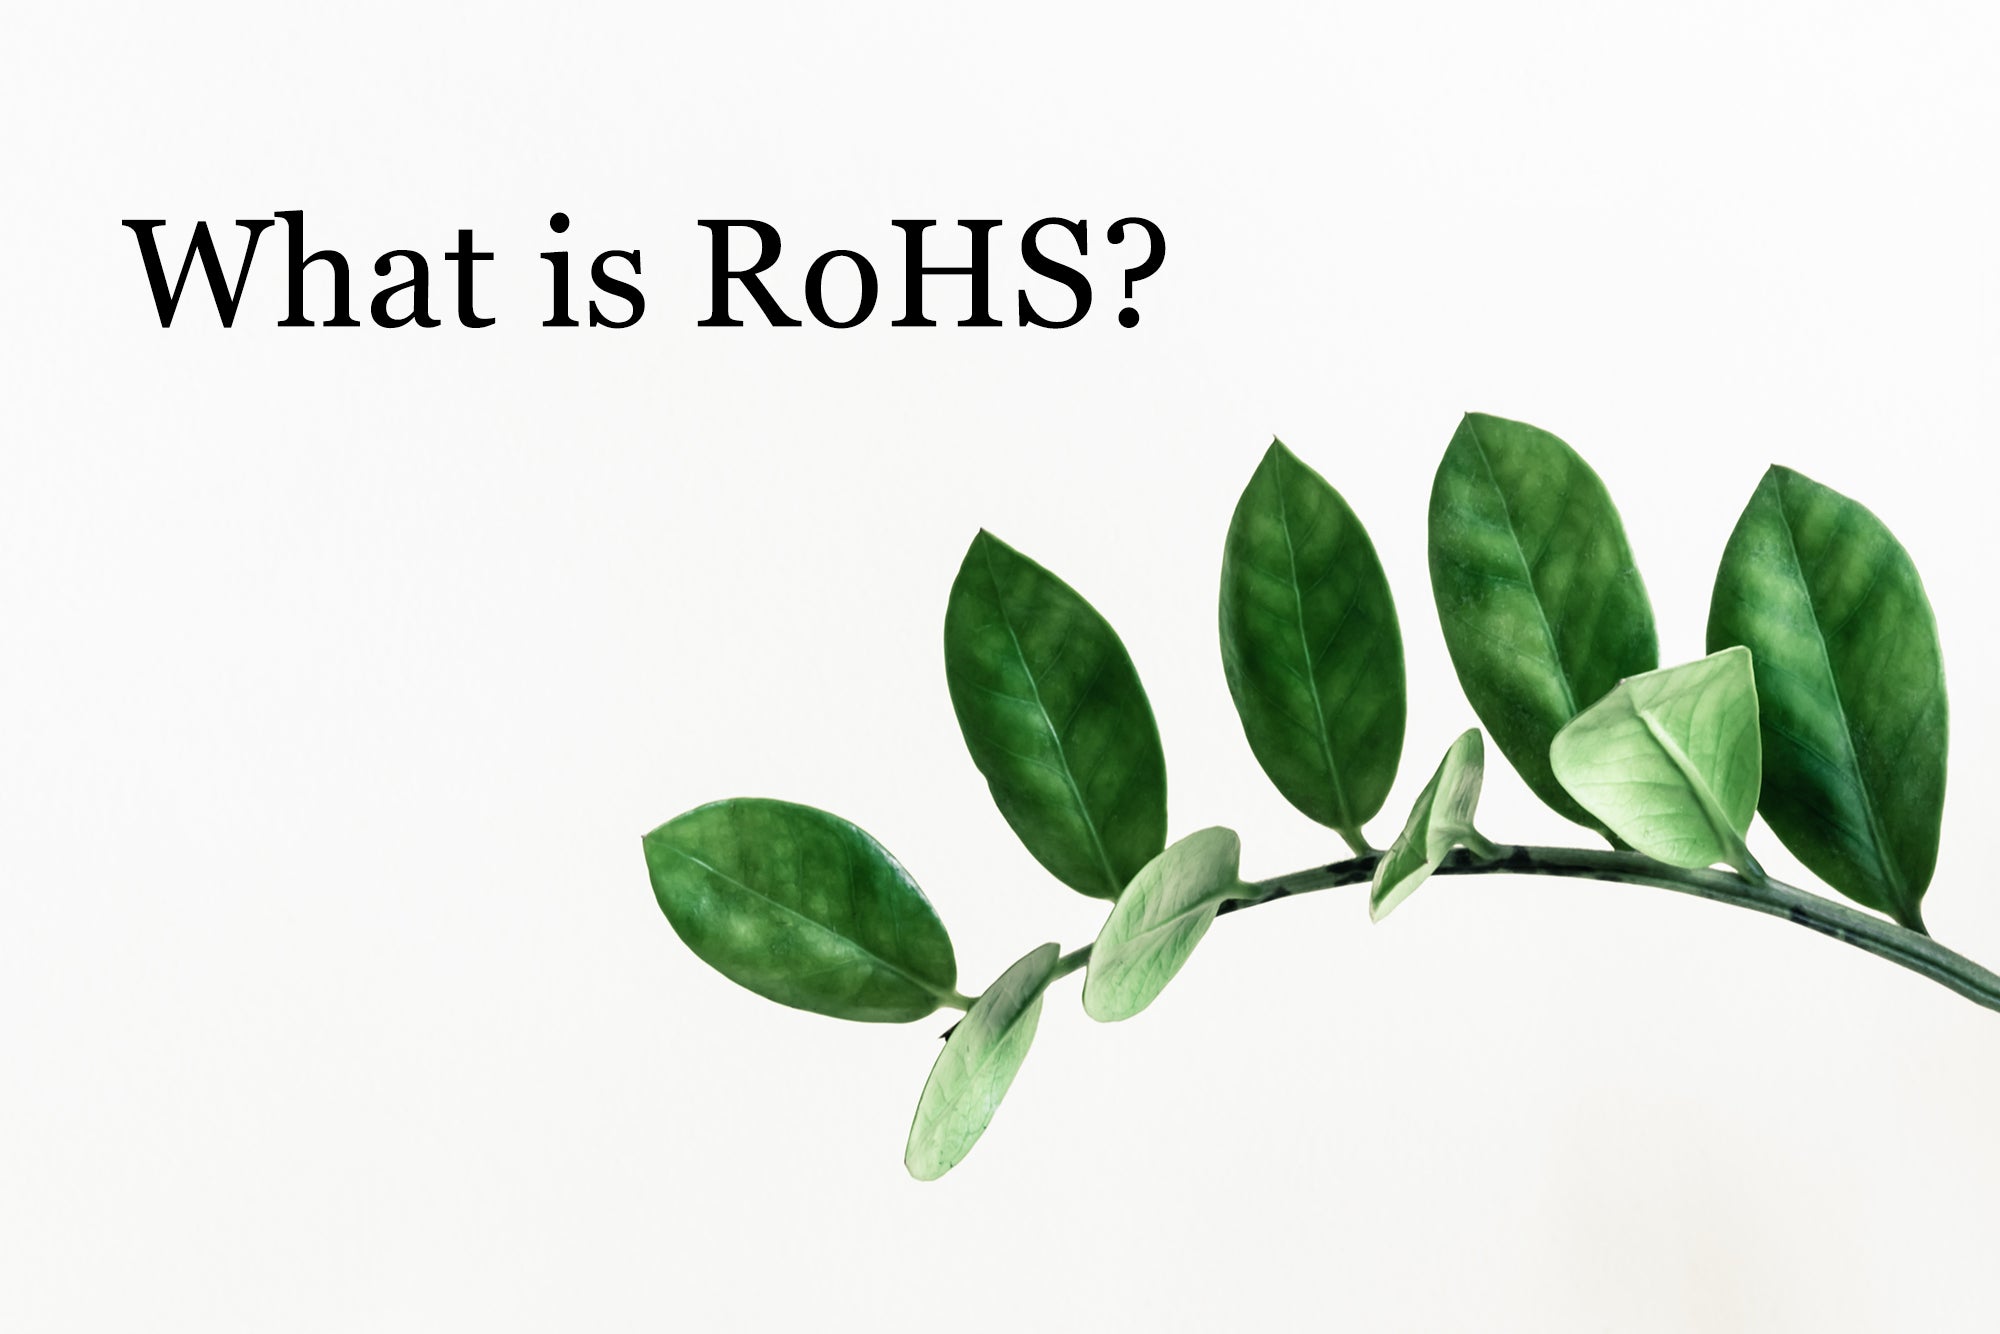 What is RoHS compliance?